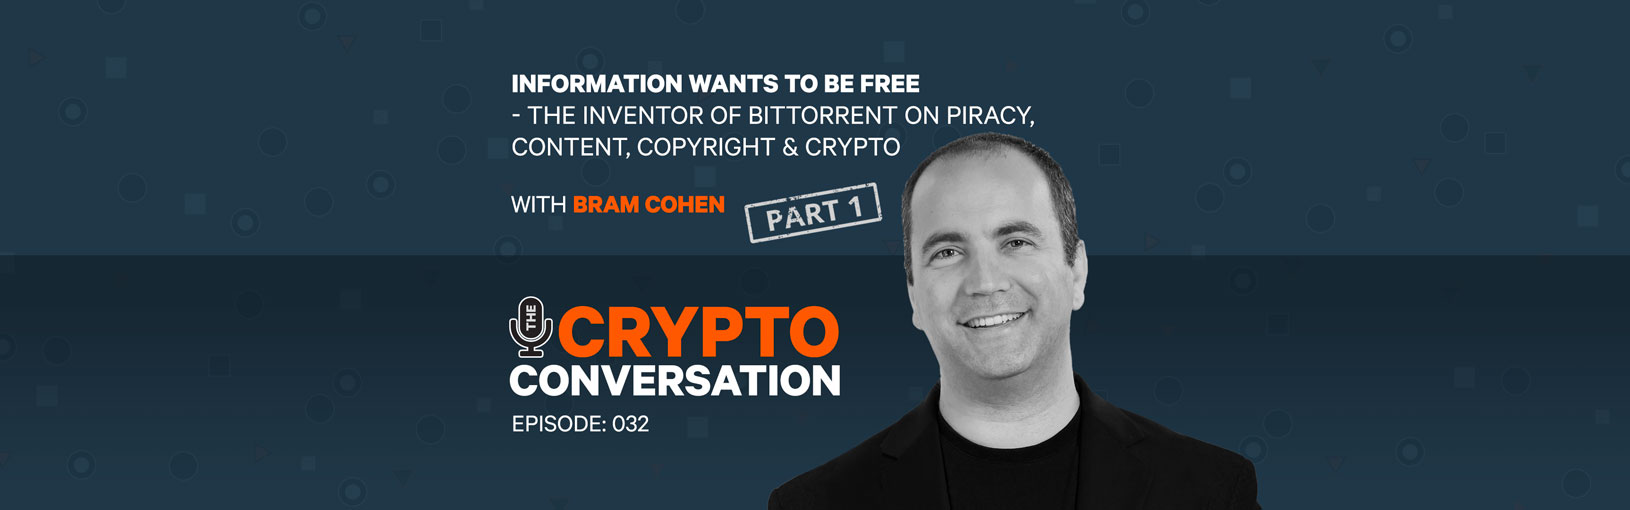 Information wants to be free – Bram Cohen on BitTorrent, content, copyright & crypto